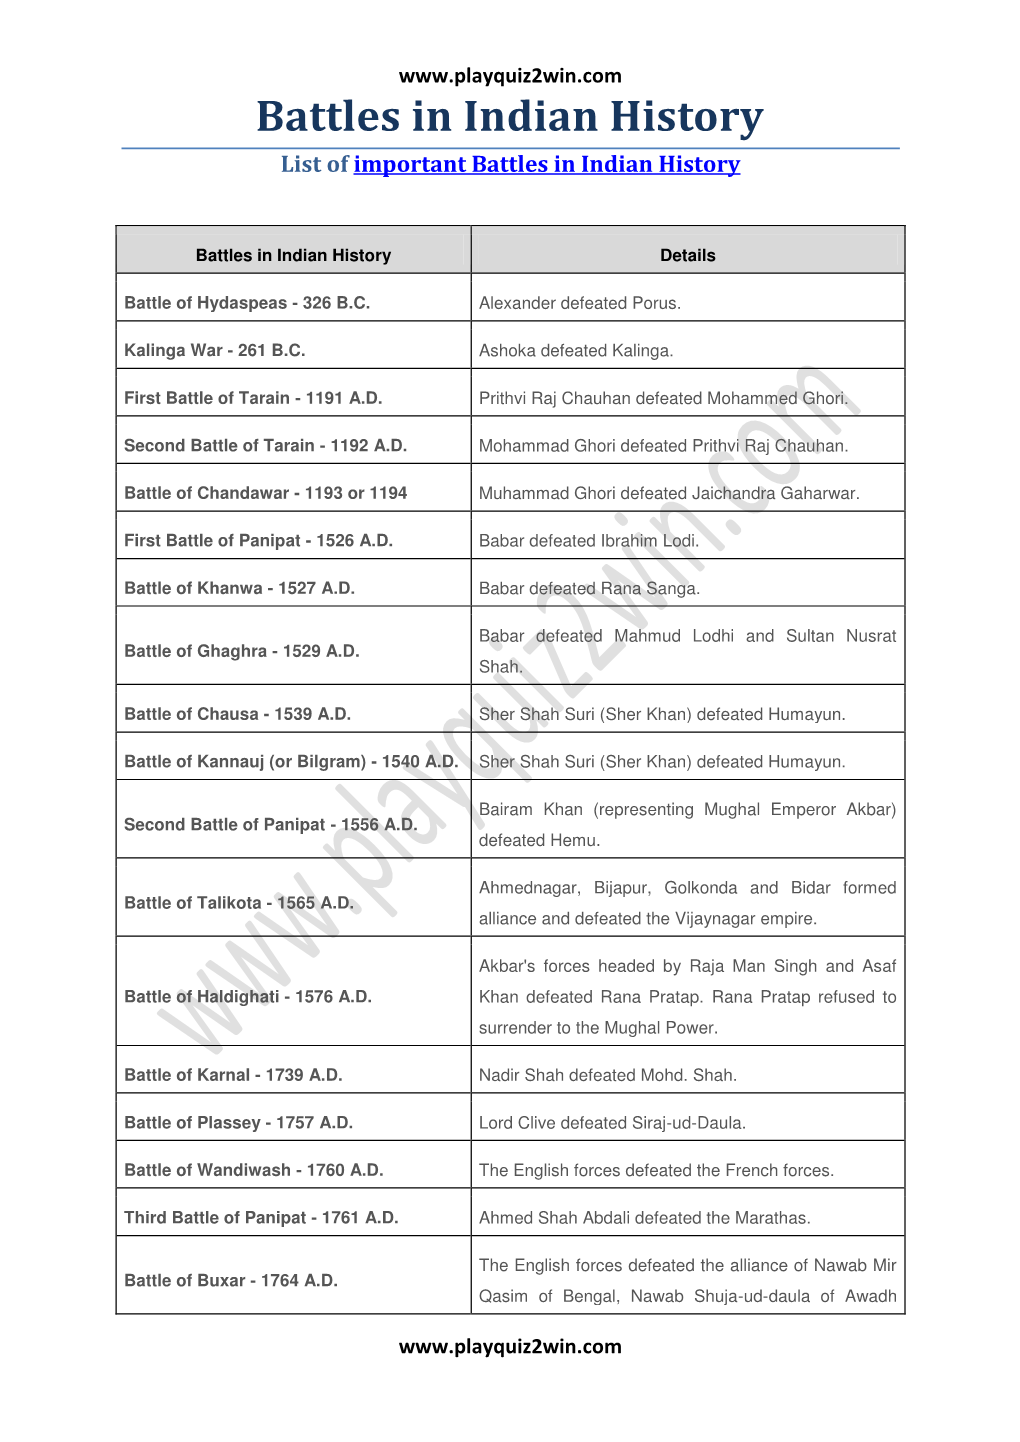 Battles in Indian History List of Important Battles in Indian History